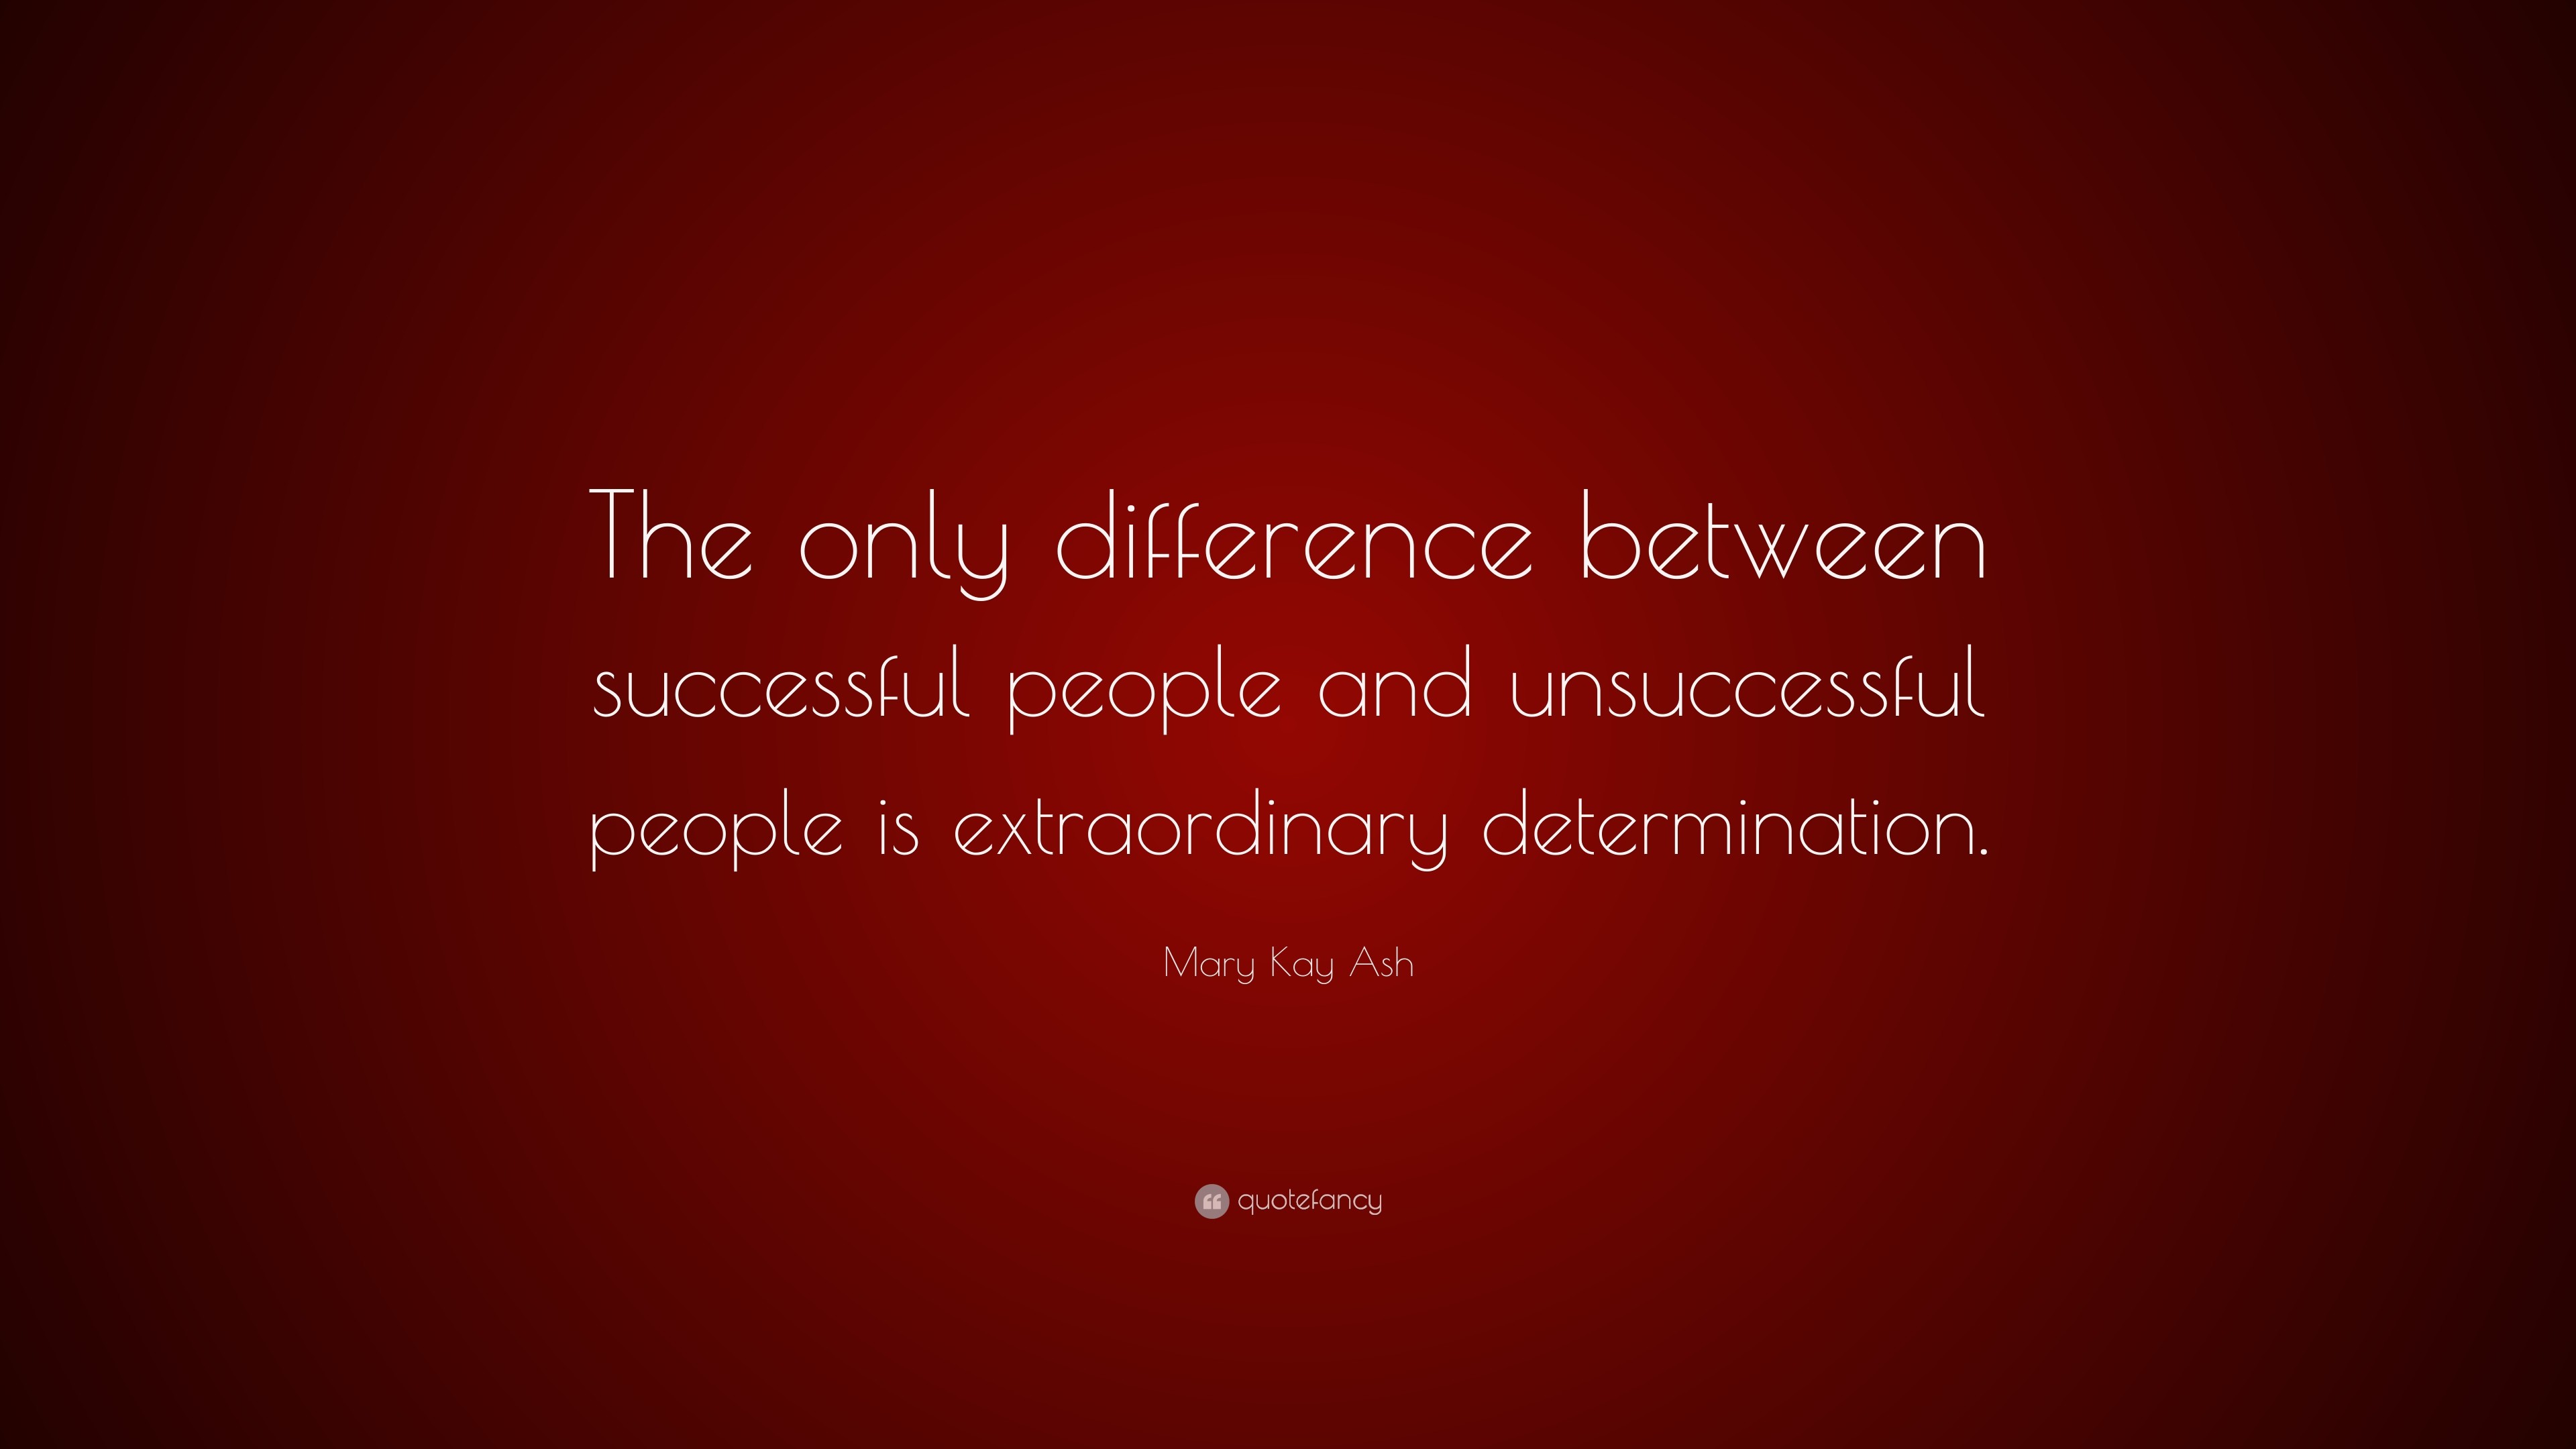 3840x2160 Mary Kay Ash Quote: “The only difference between successful people and  unsuccessful people is